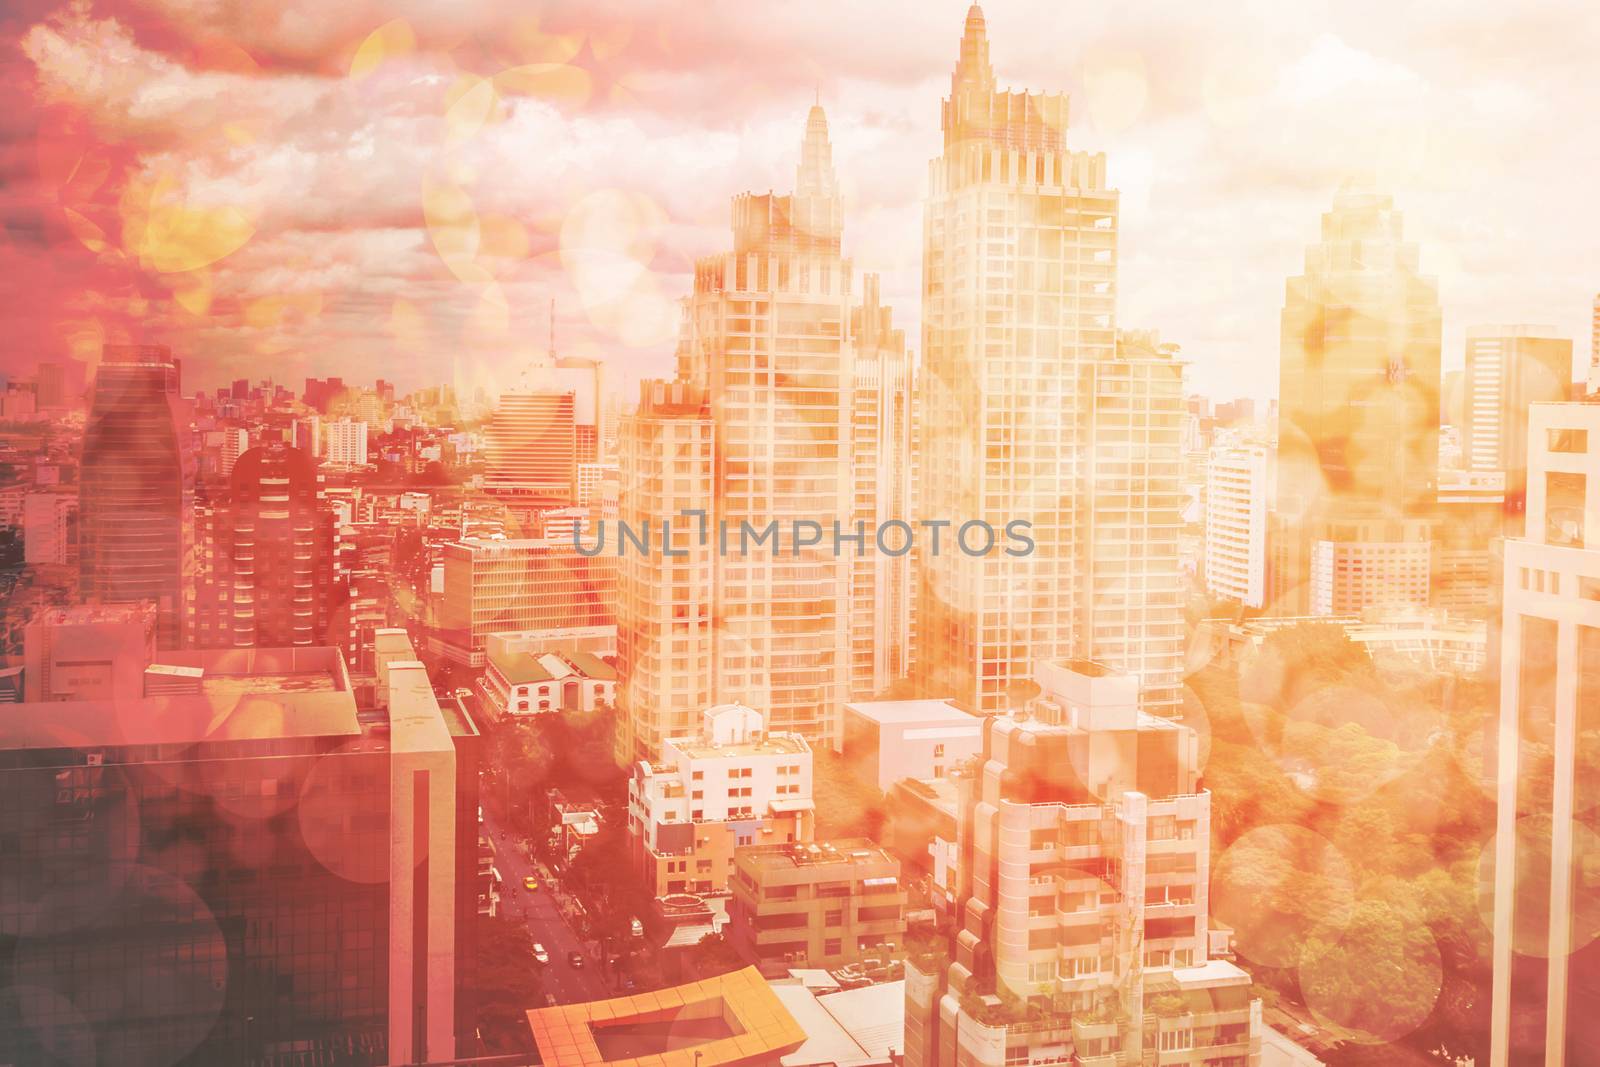 Abstract town background with blurred buildings and street, town by rakoptonLPN